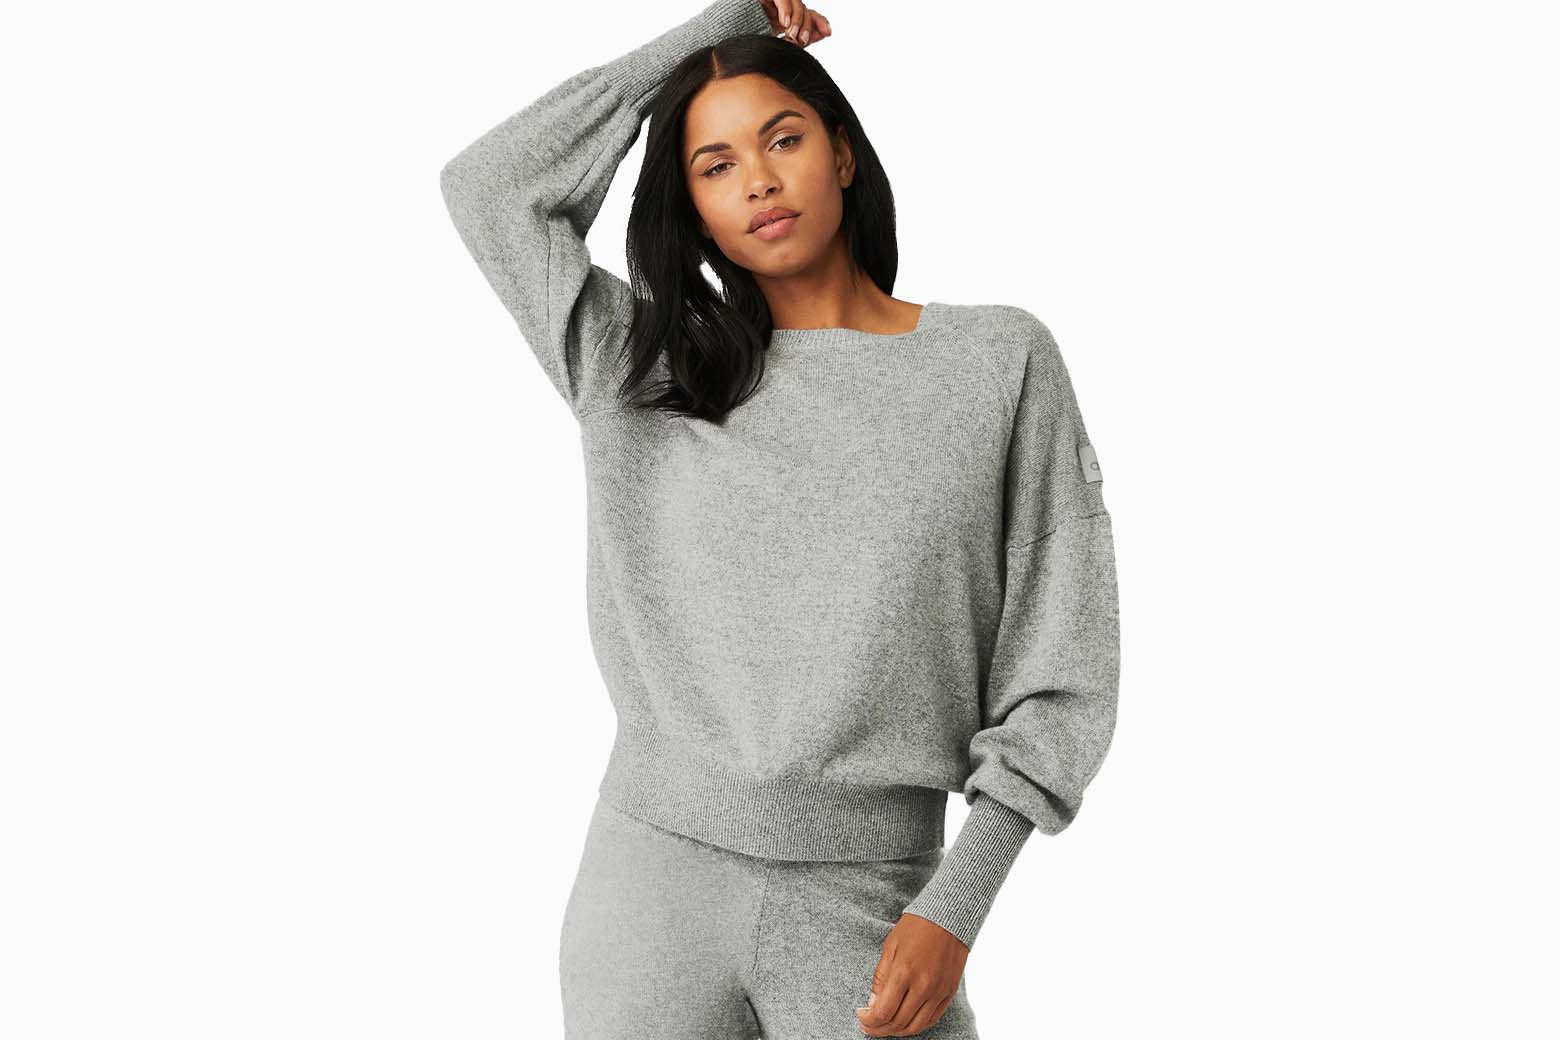 25 Best Sweaters For Women To Snuggle Up In Style